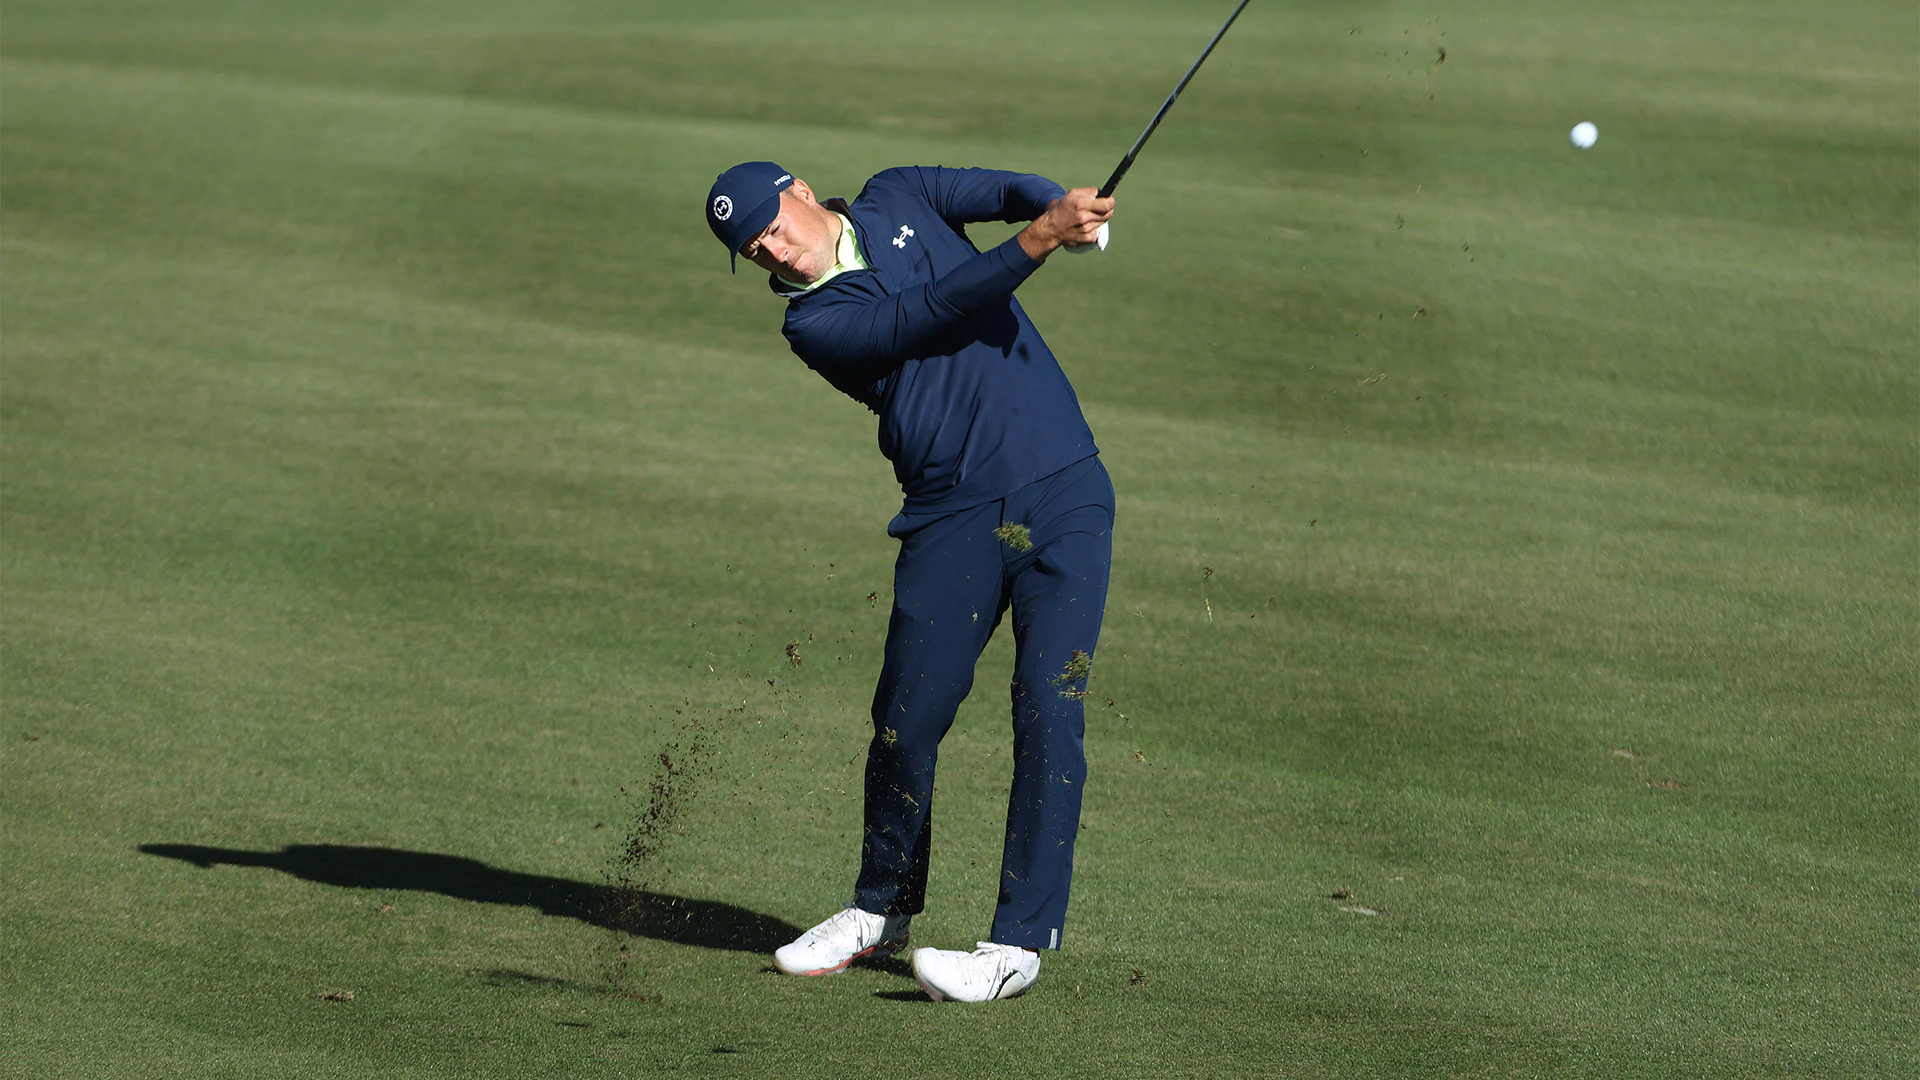 Jordan Spieth, T-2 after 36-holes at CJ Cup, keeping ‘foot on the gas pedal’ next two days